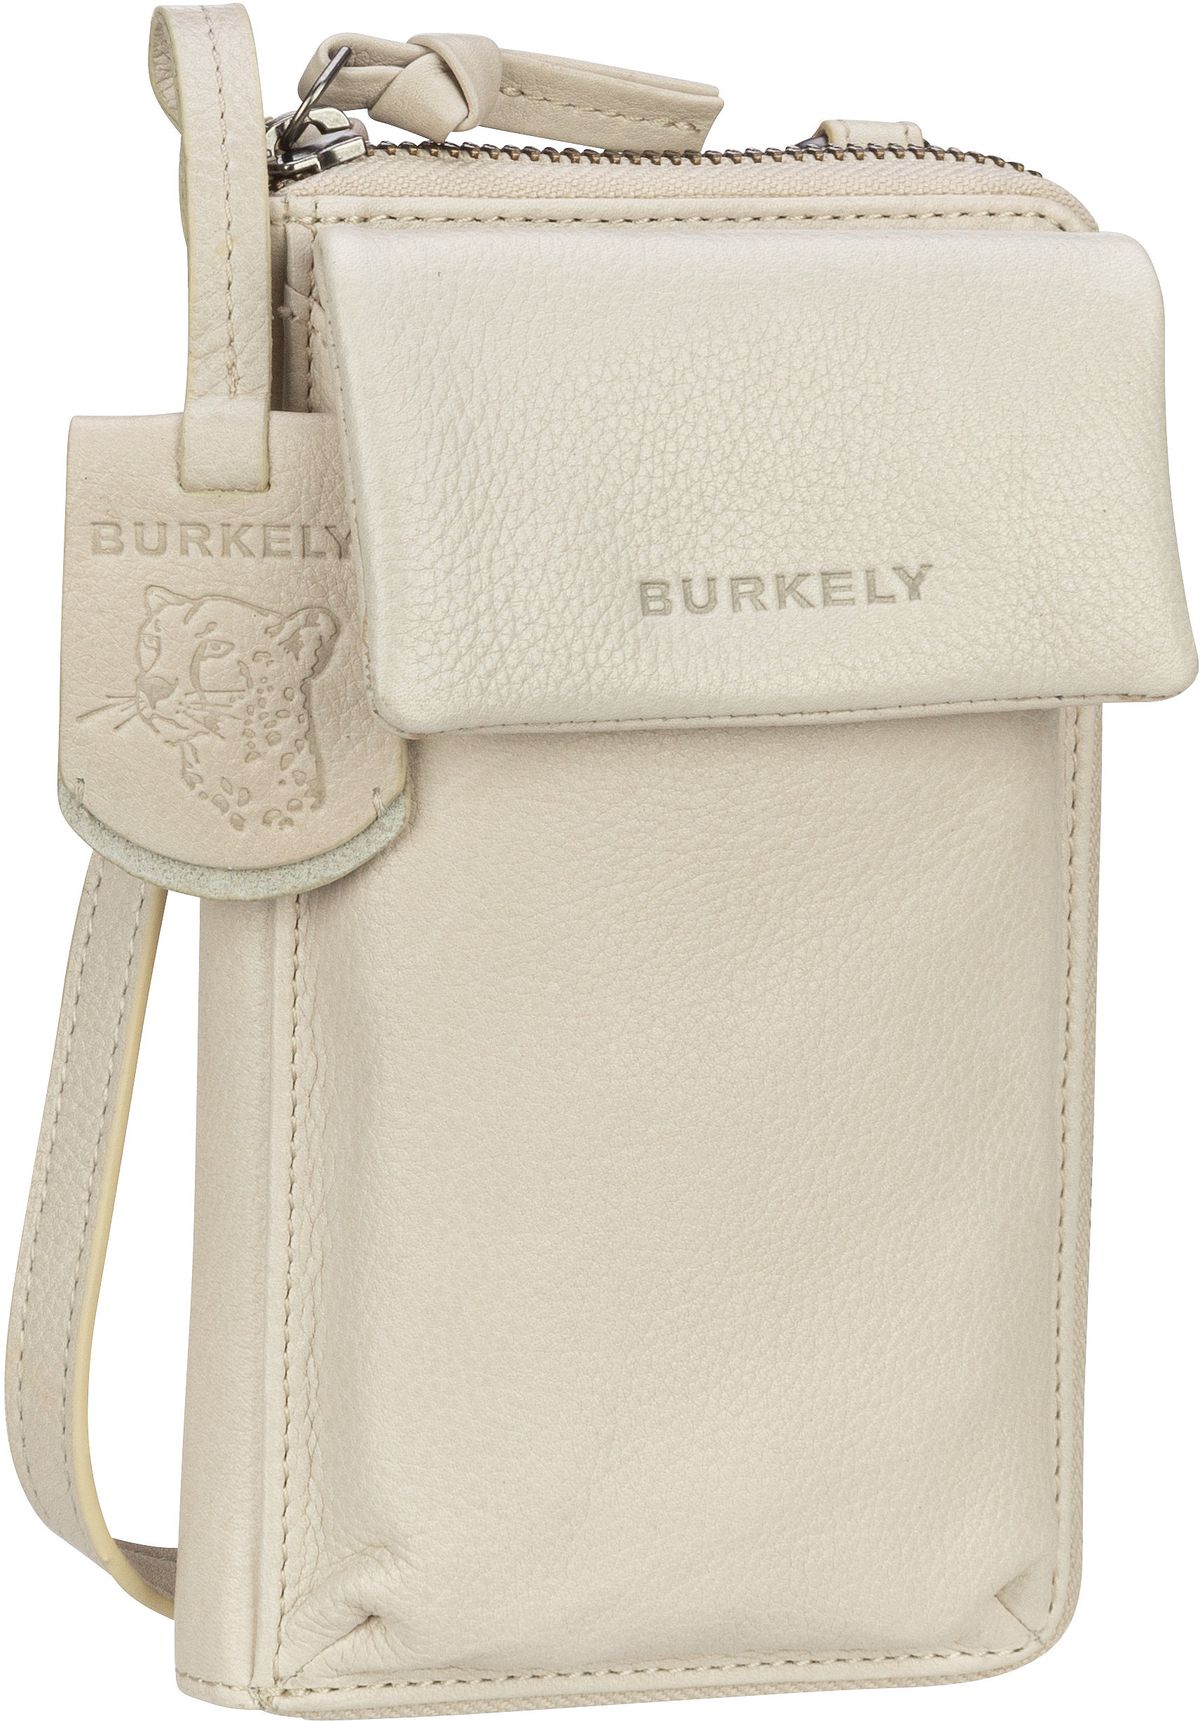 Burkely Just Jolie Phone Wallet - Off White